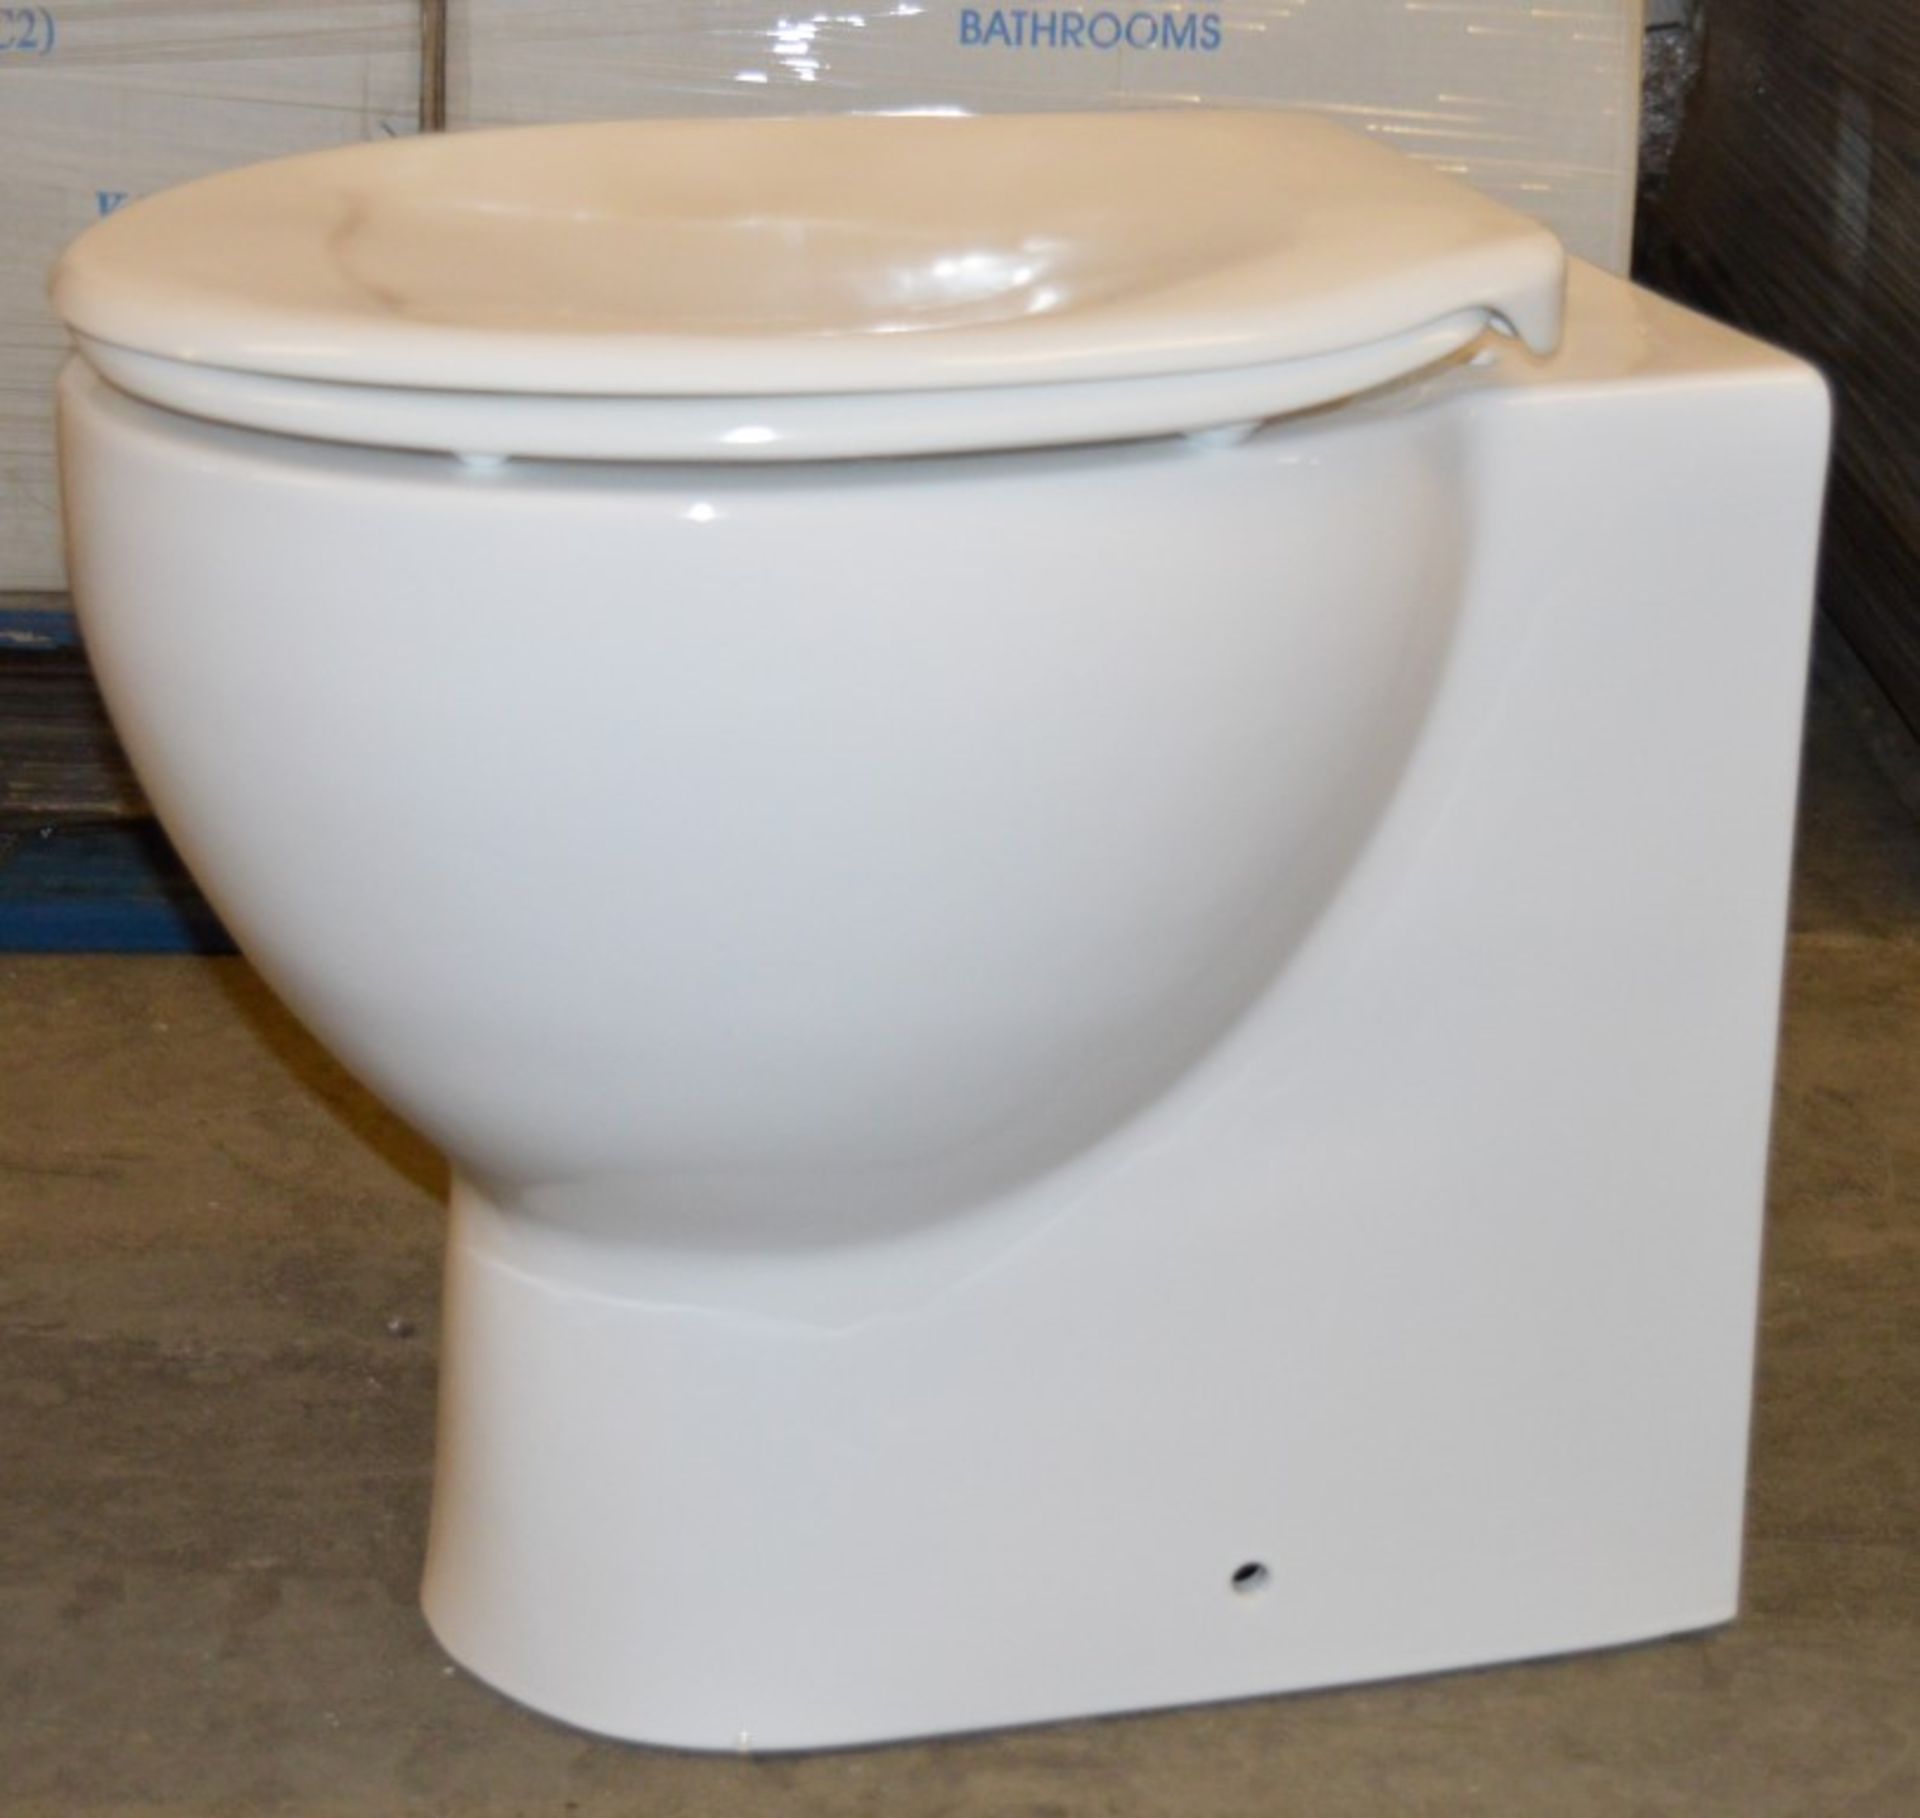 1 x Arc Back to Wall WC Toilet Pan With Soft Close Seat - Vogue Bathrooms - Brand New Boxed - Image 6 of 6